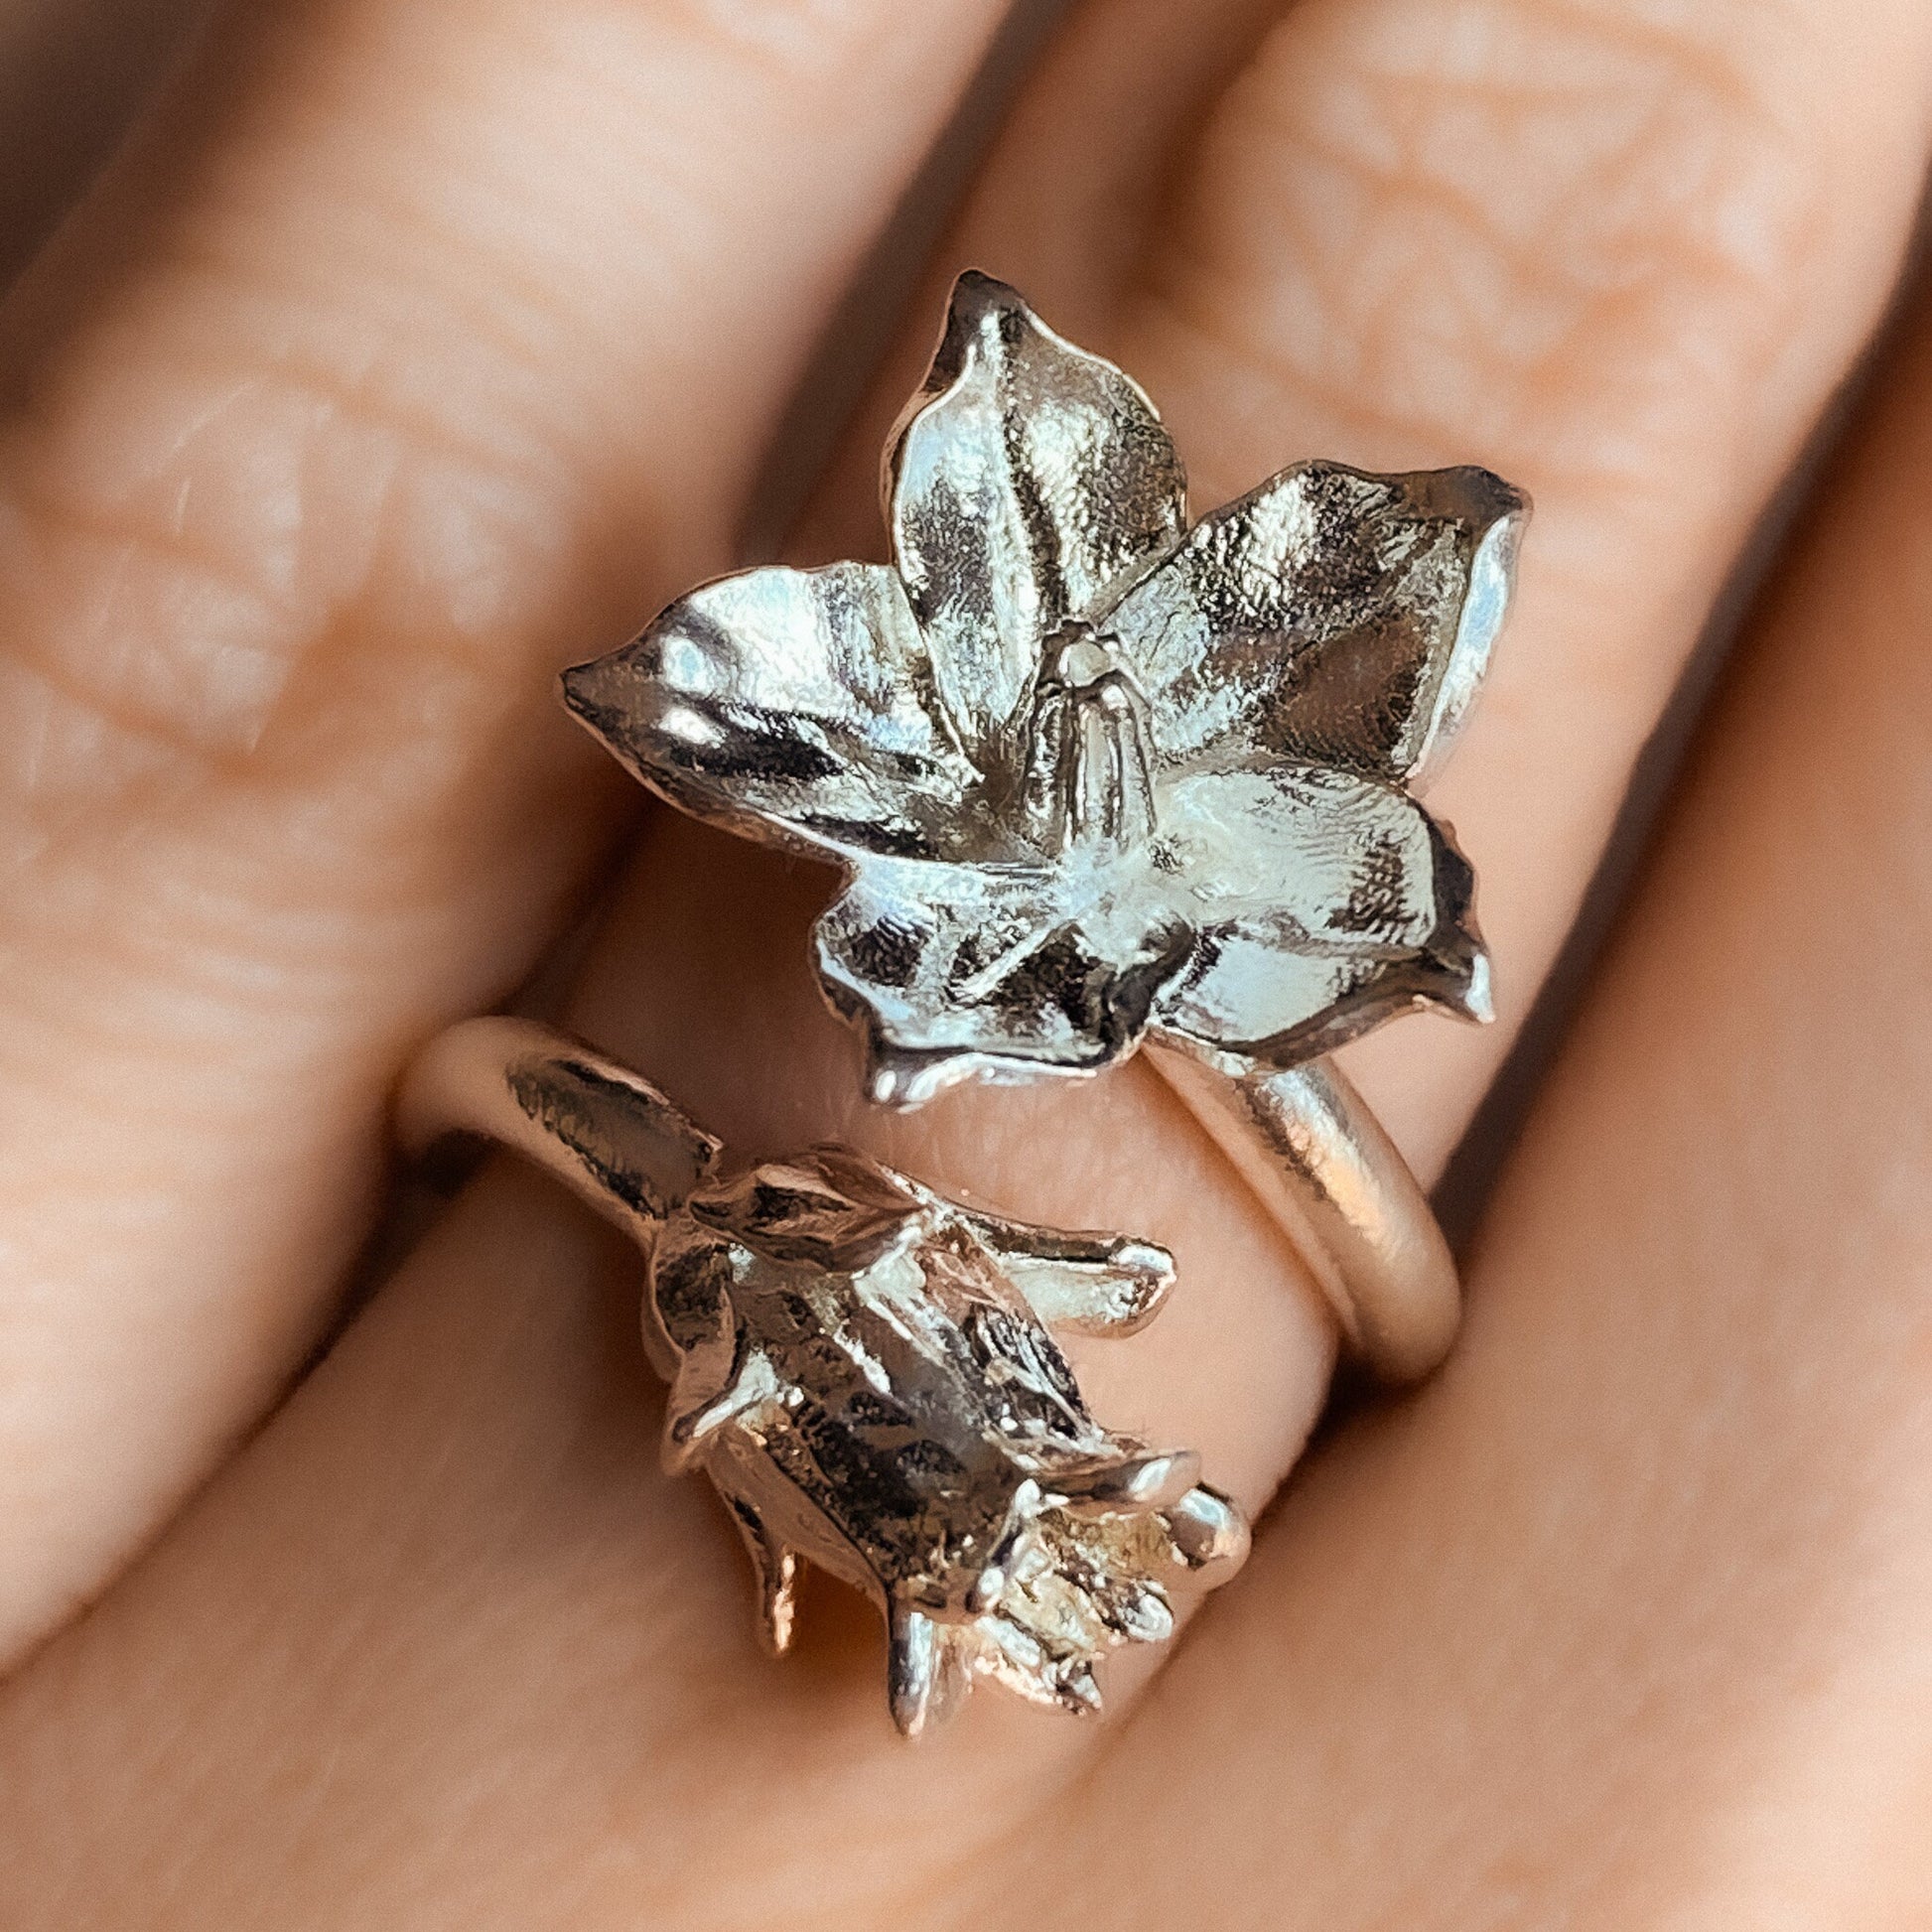 Deadly Nightshade Flower Ring